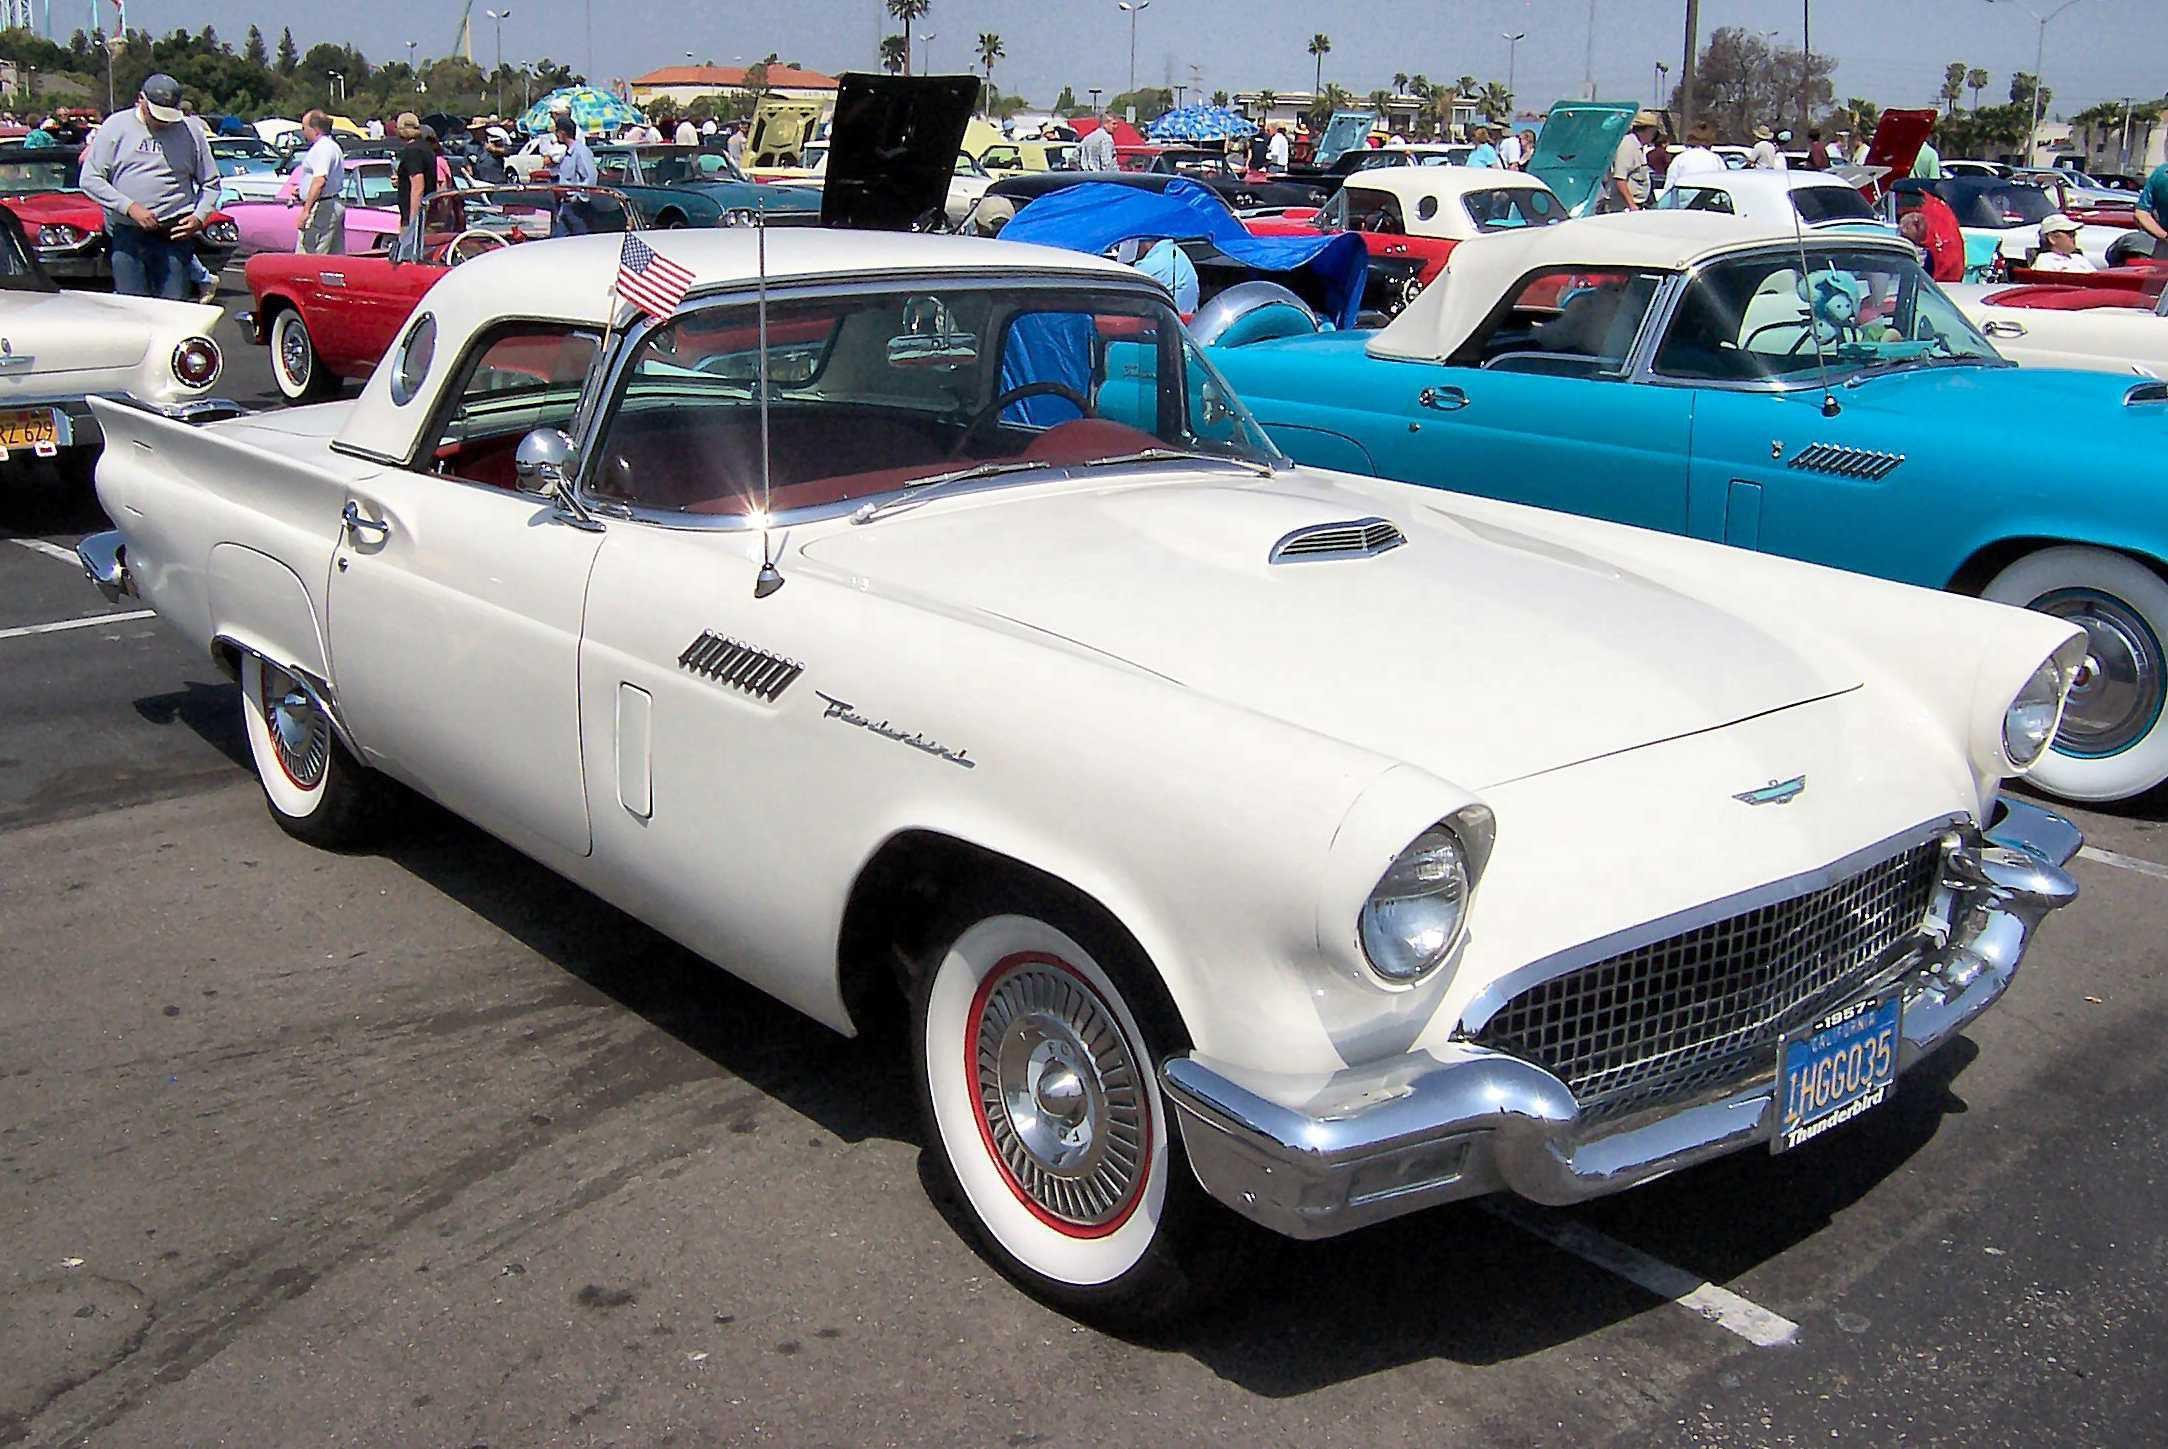 Ford Thunderbird Wallpaper Image Photo Picture Background